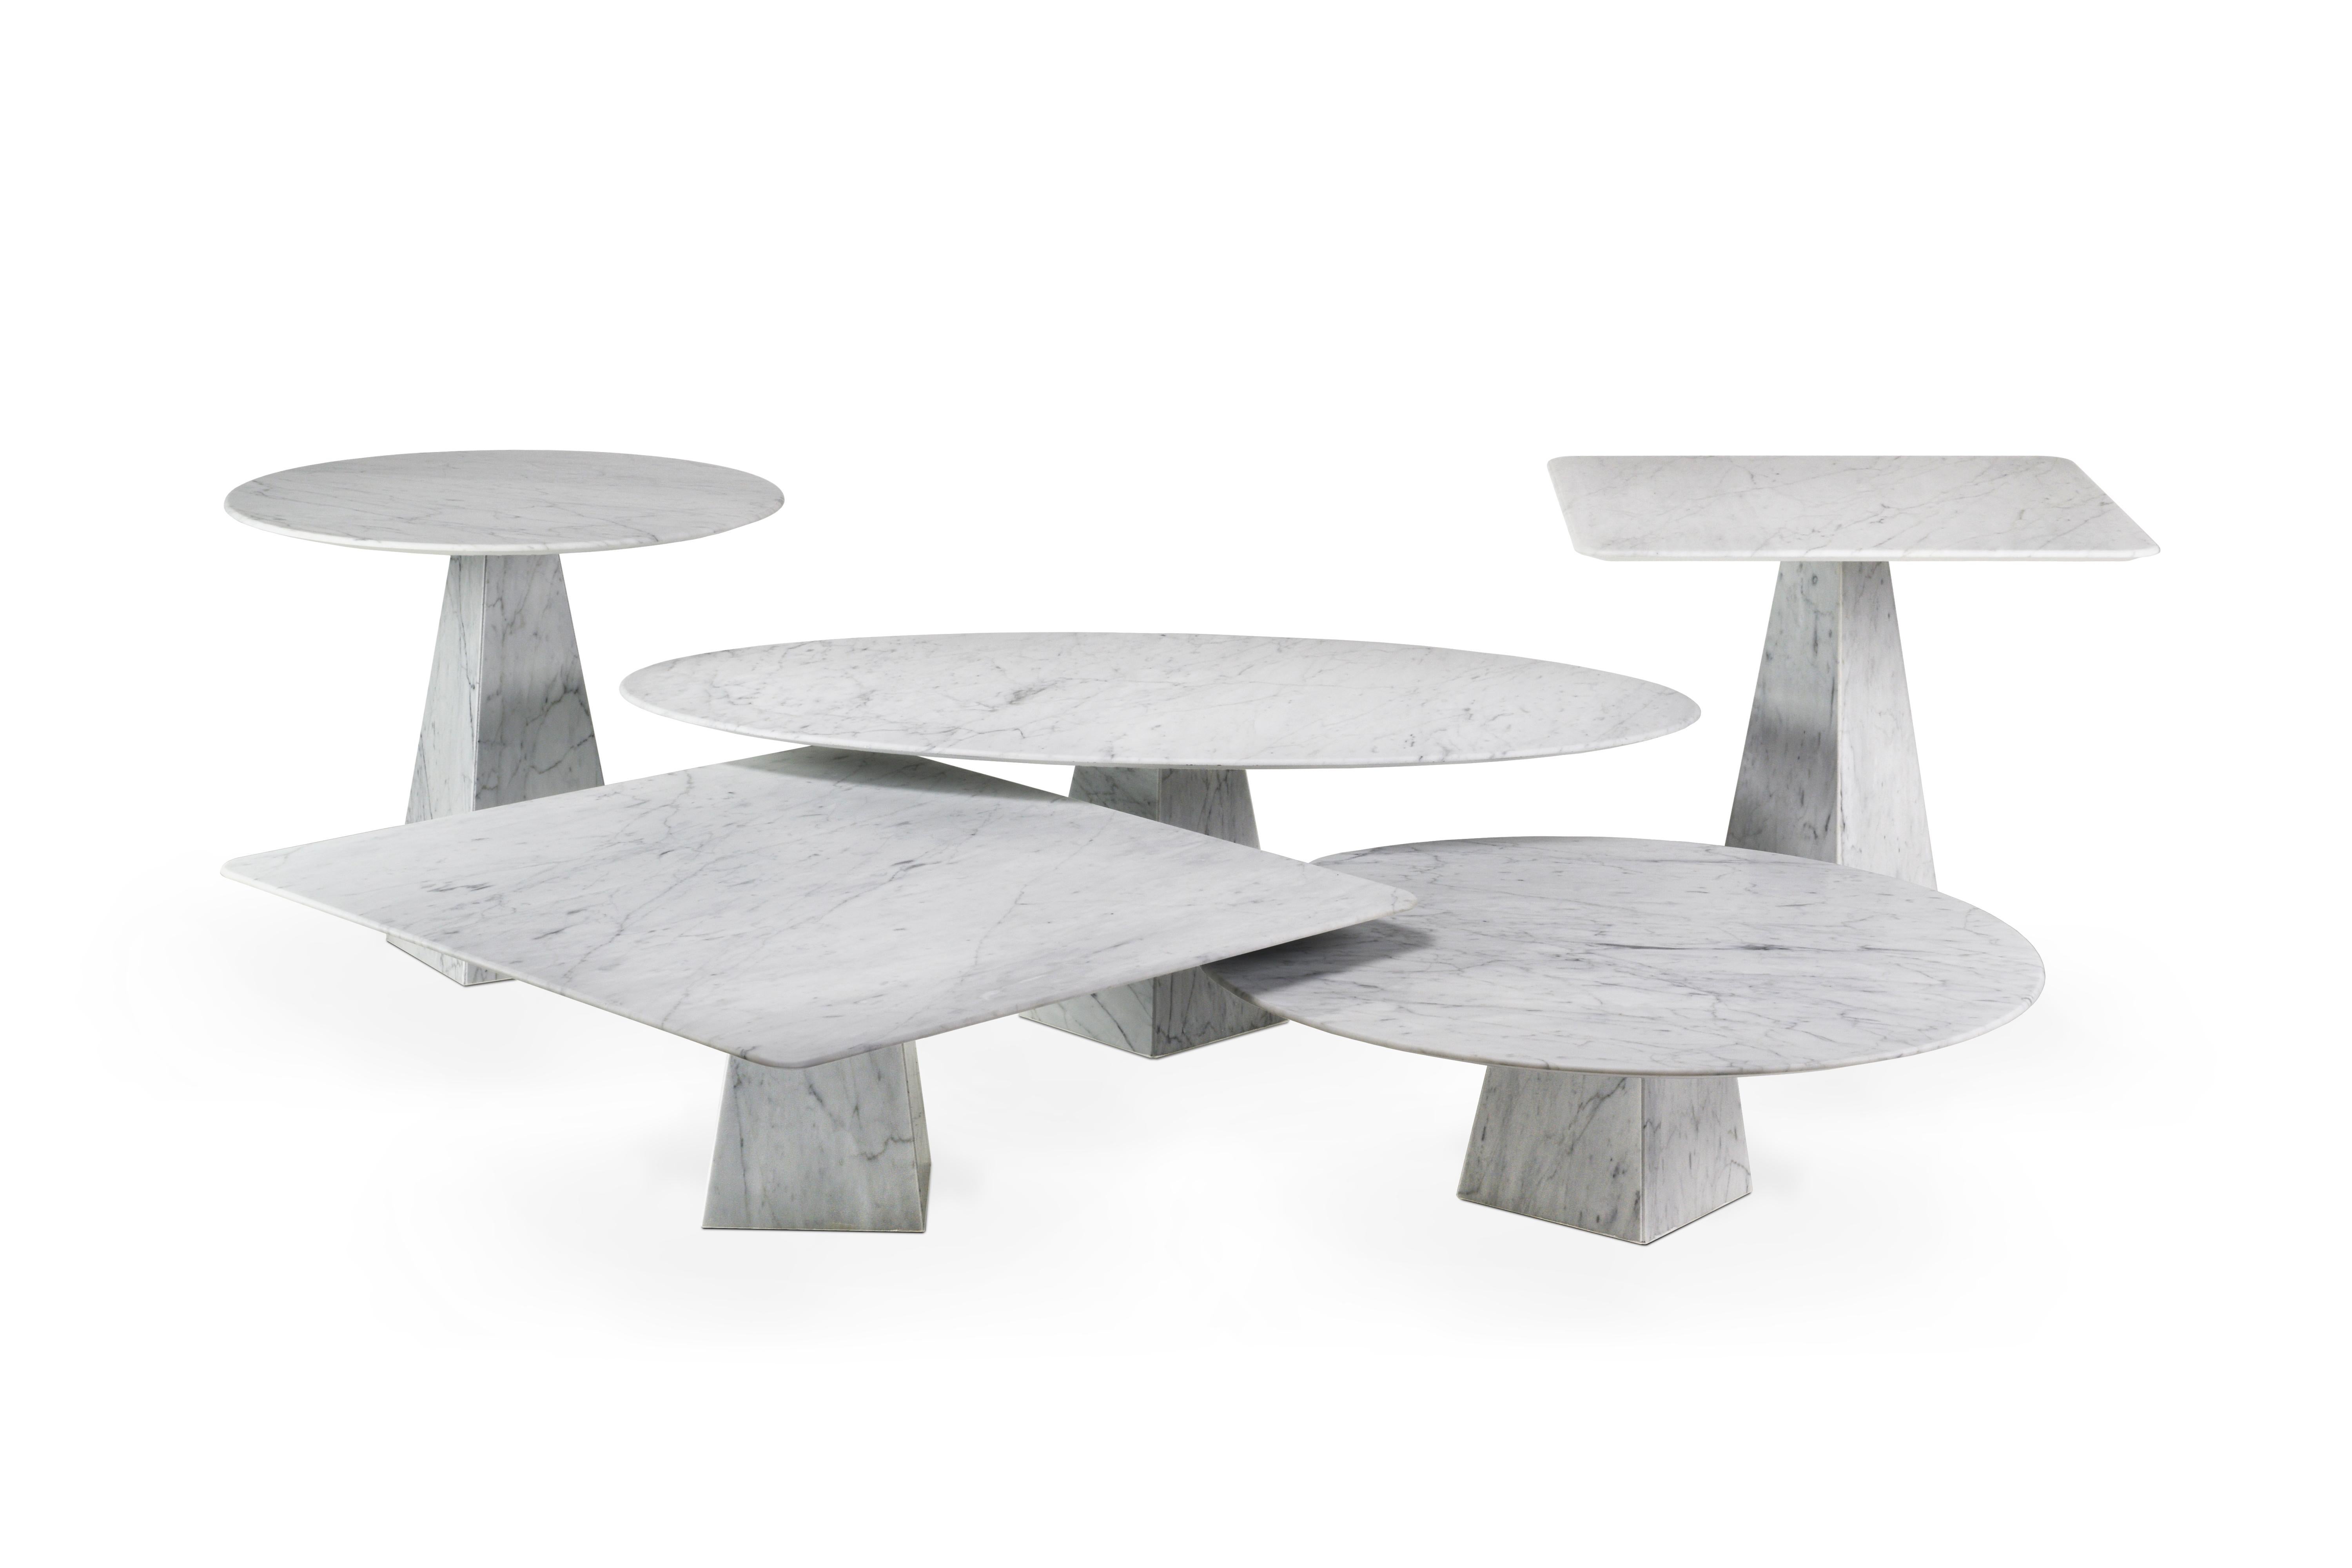 Inspired by the feeling of weightlessness and its connection to the space, crafted entirely in laminated stone.
This advanced technique allows us to get an ultra-thin and high resistant marble tabletop. The tables are light, simple, easy and